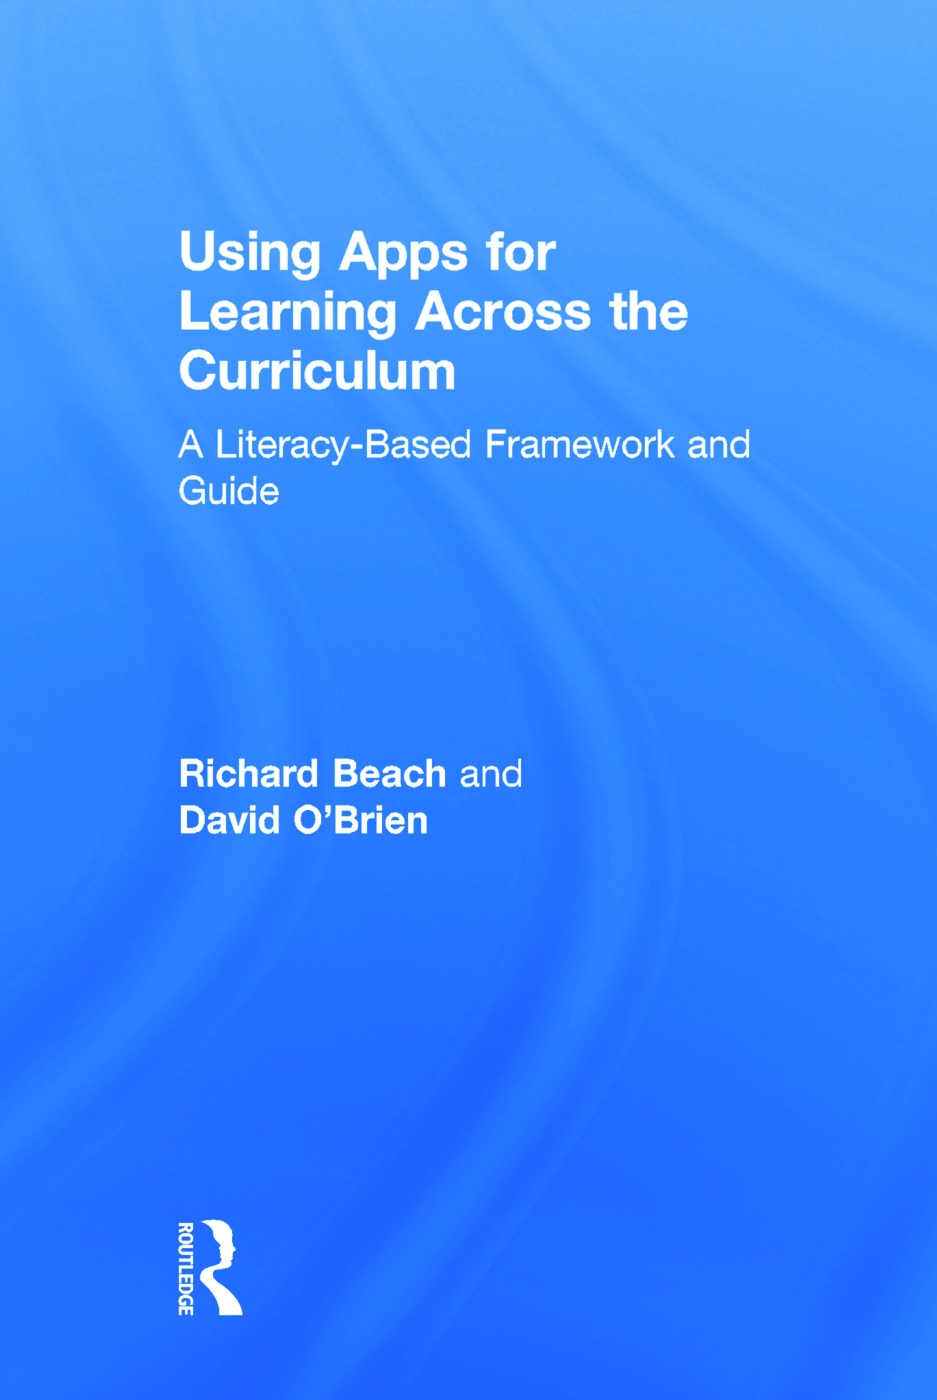 Using Apps for Learning Across the Curriculum: A Literacy-Based Framework and Guide